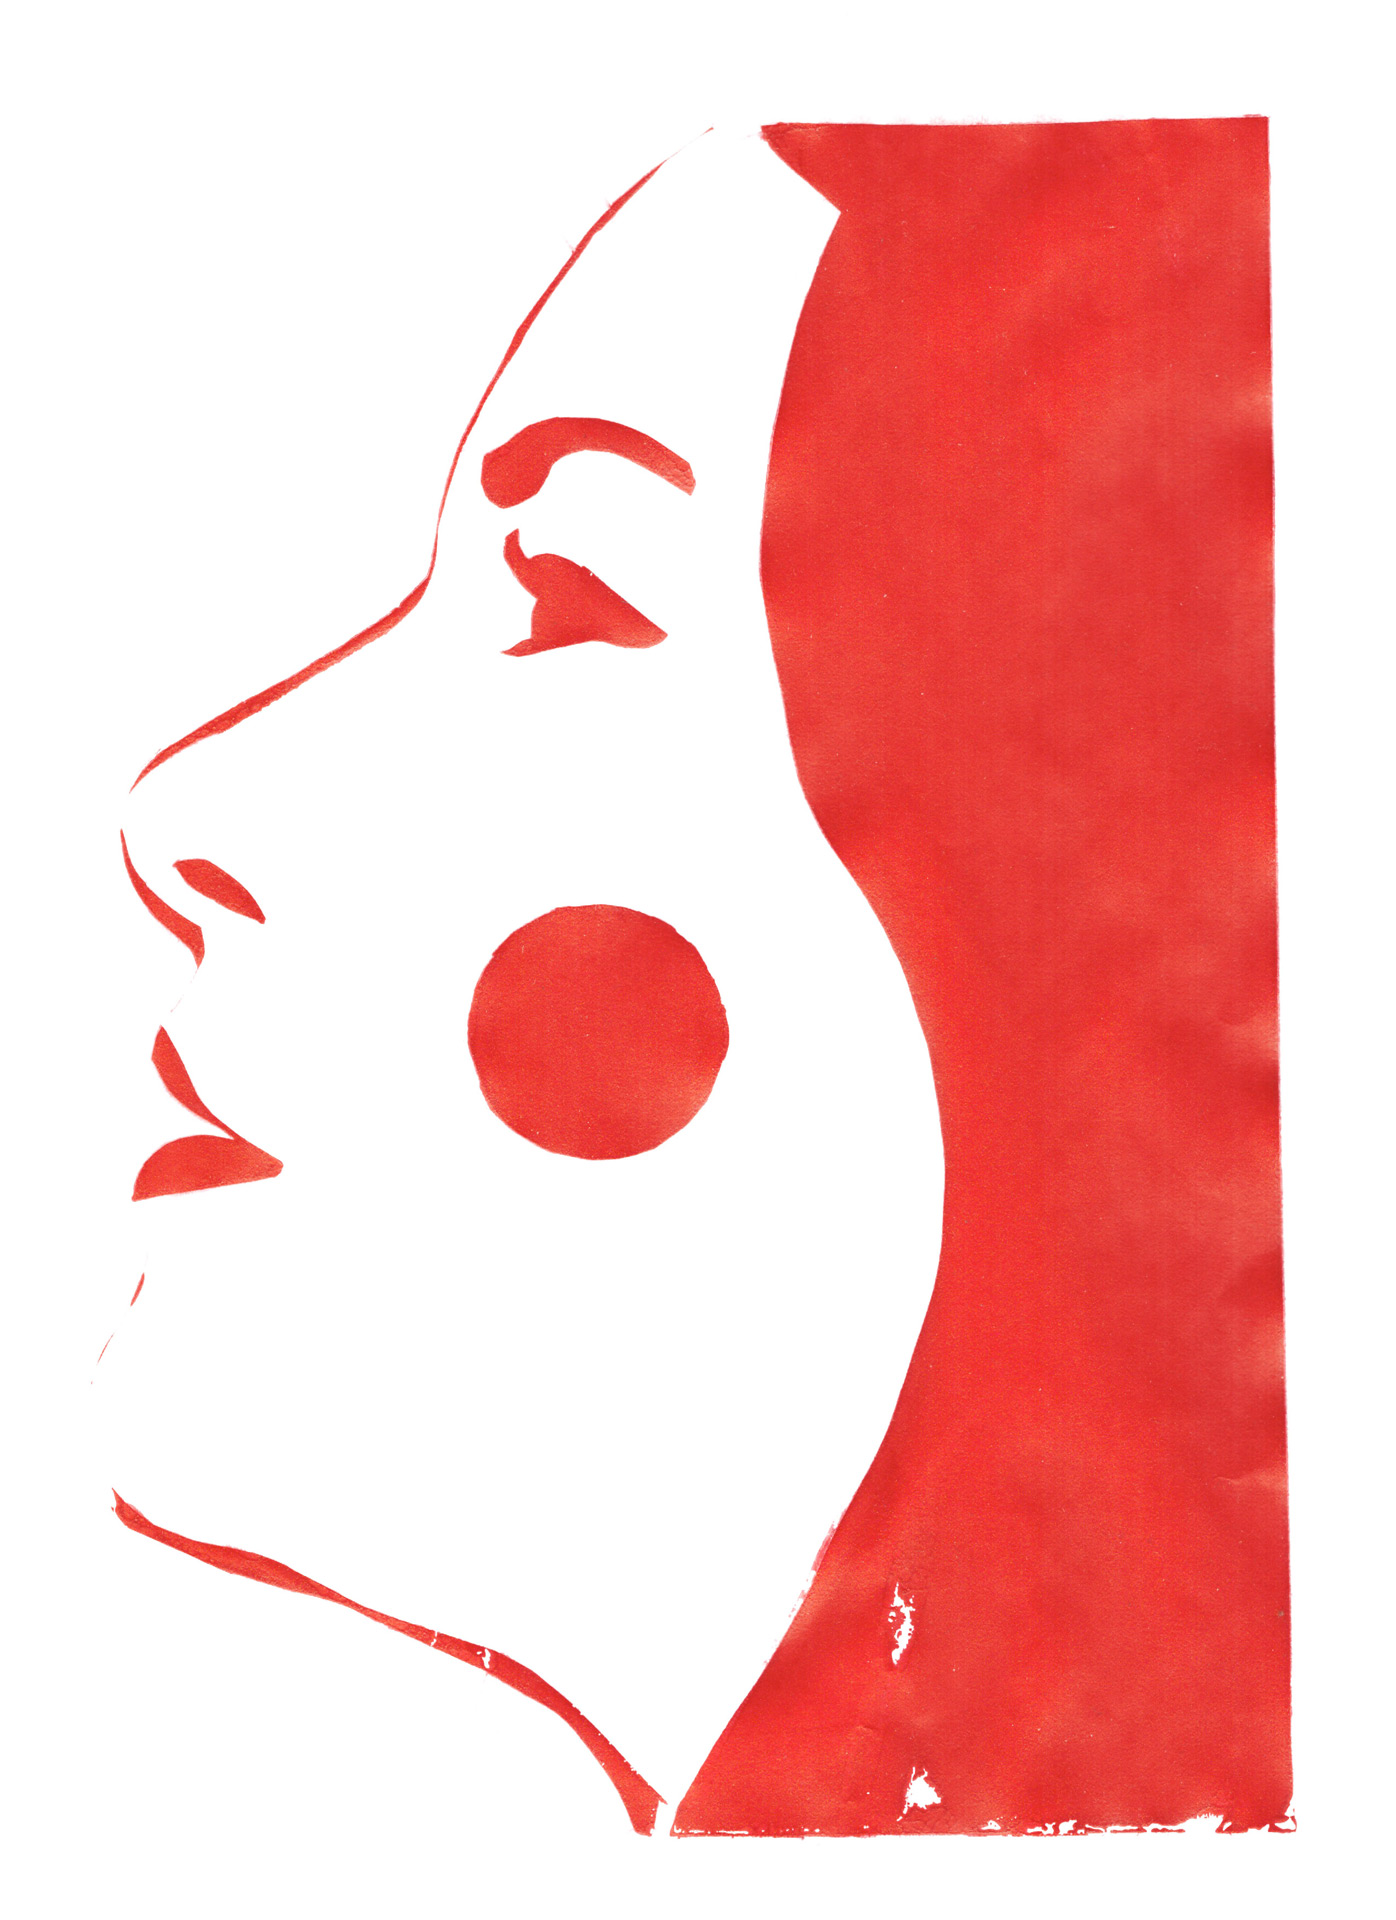 Screenprint of the side profile of a woman's face. It is in an outlined style, with the bright red ink making up the features of the hair, eye, nose, lips and cheek. The print is on white paper.